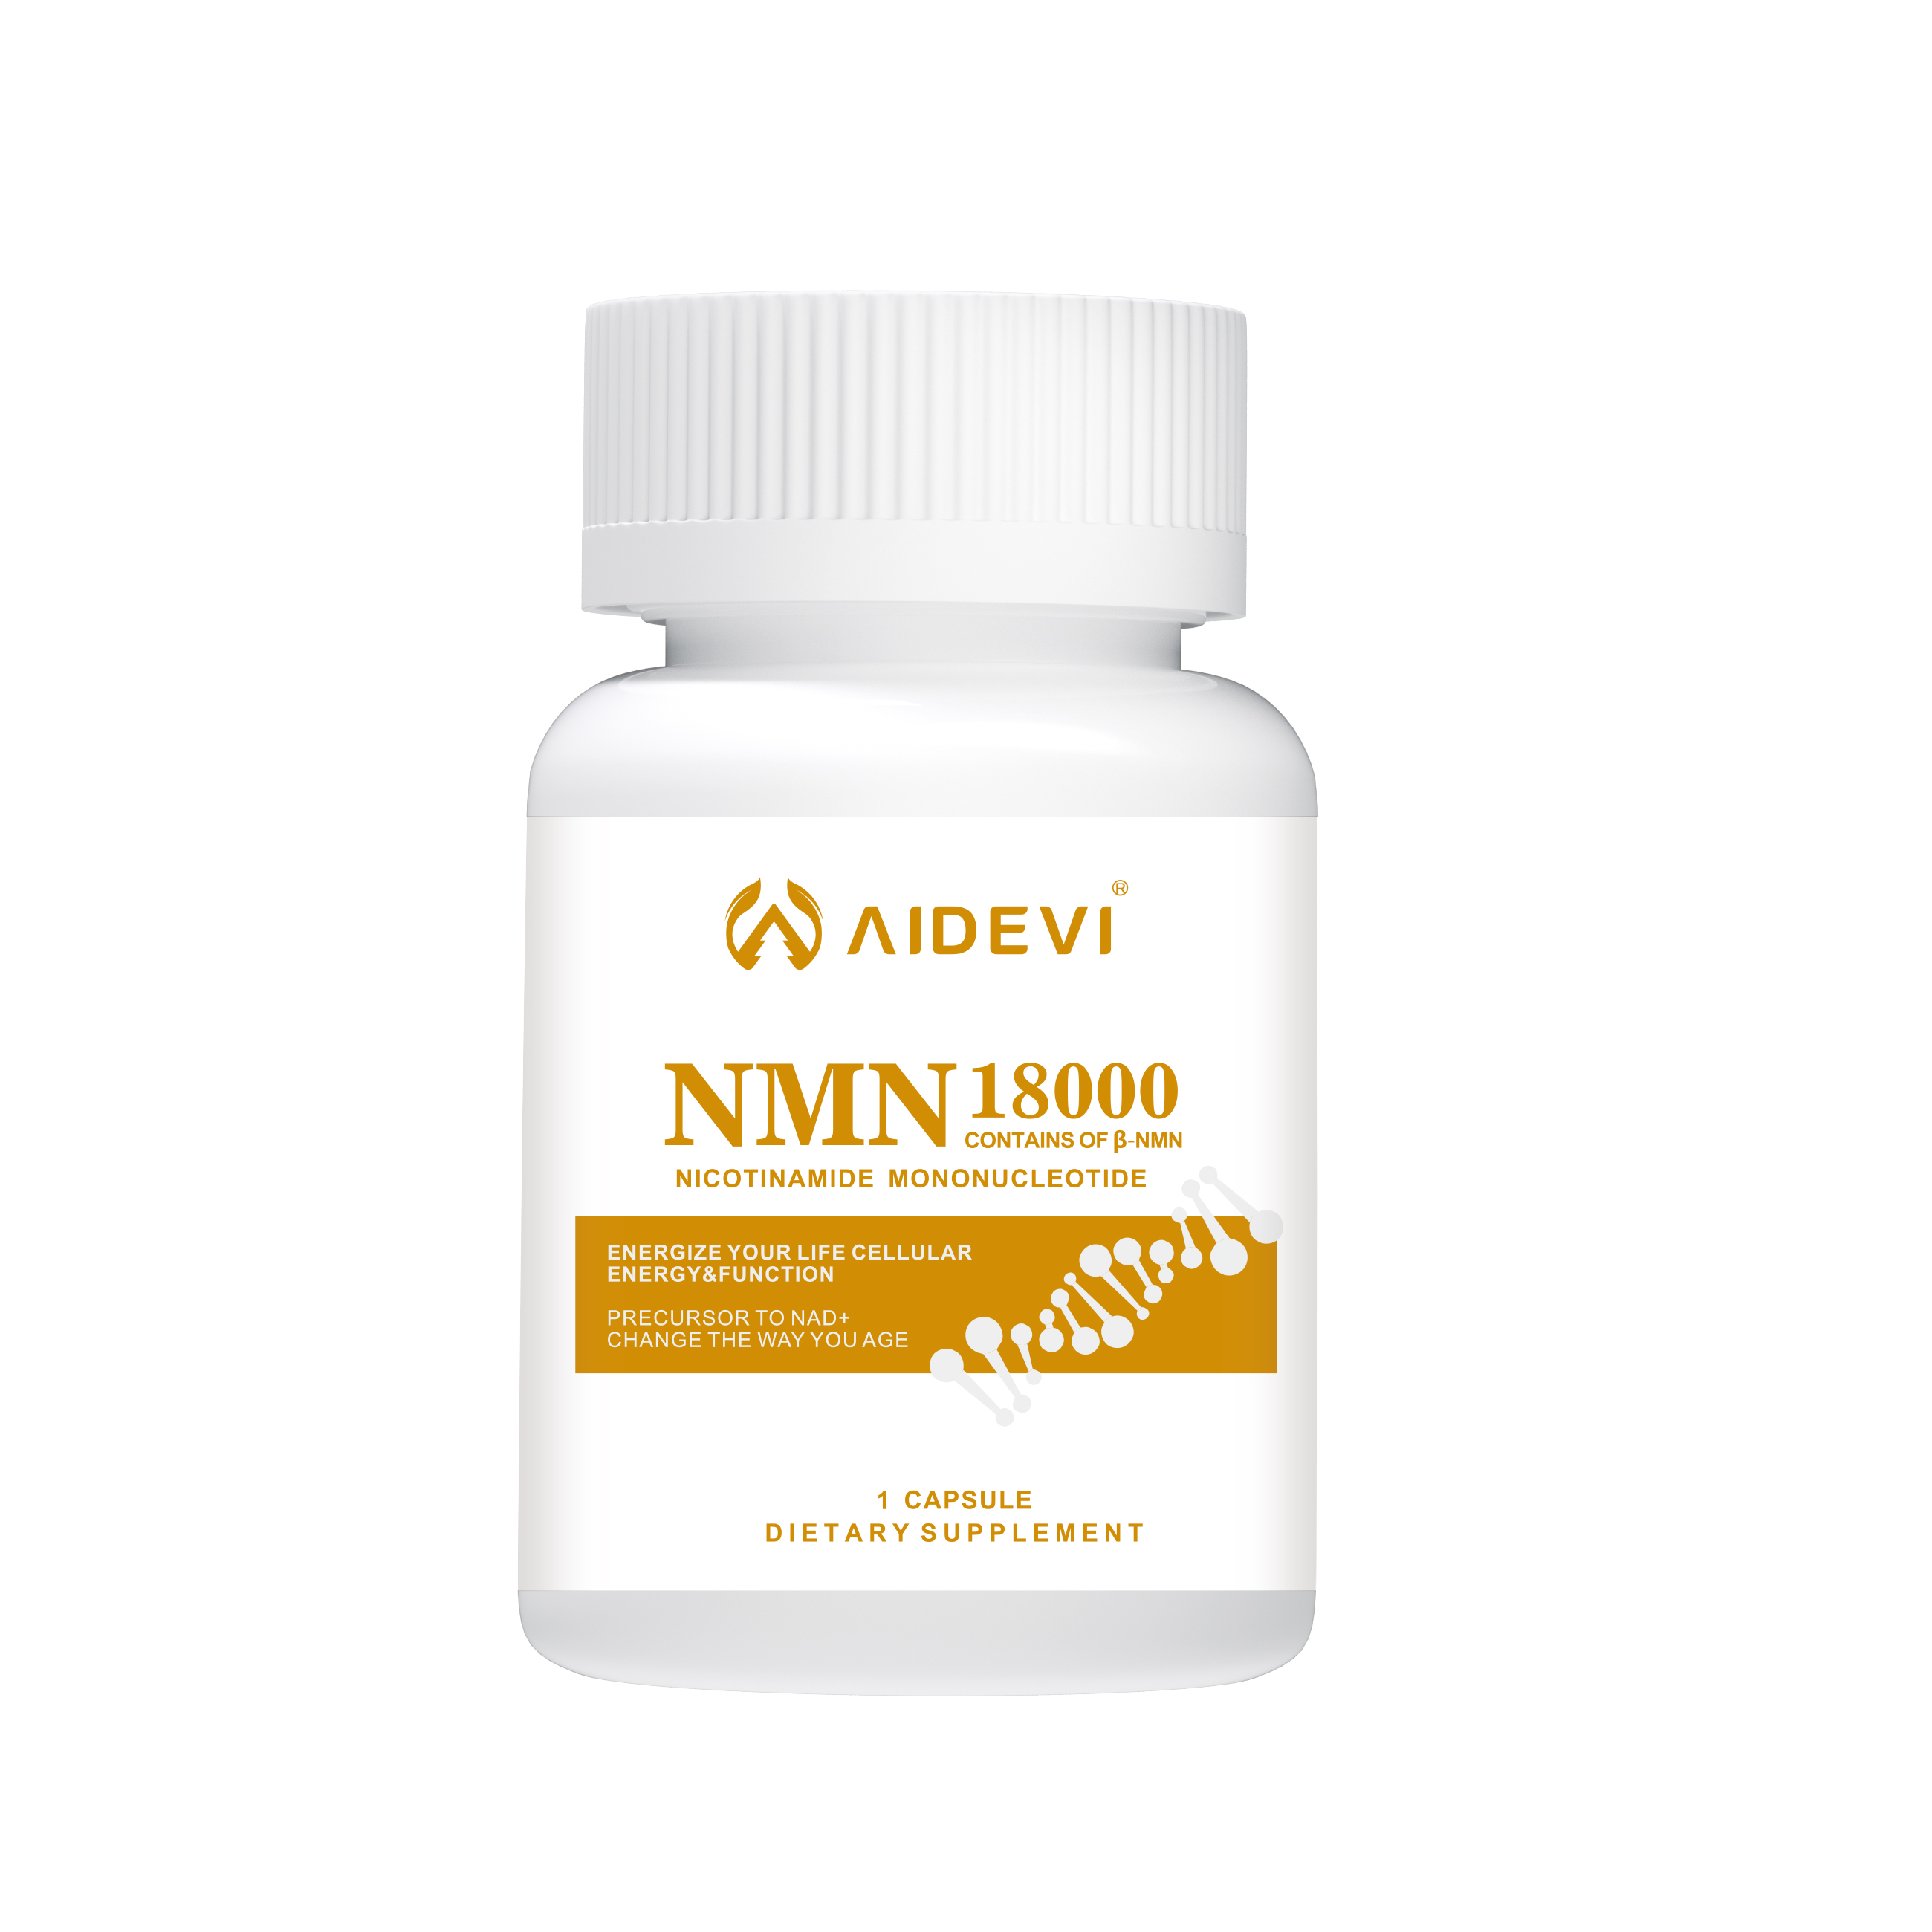 AIDEVI NMN18000 NMN Supplements Nicotinamide Mononucletide Anti-Aging Supplement Nmn Benefits 300MG Resveratrol Anthocyanin Longevity Made In USA